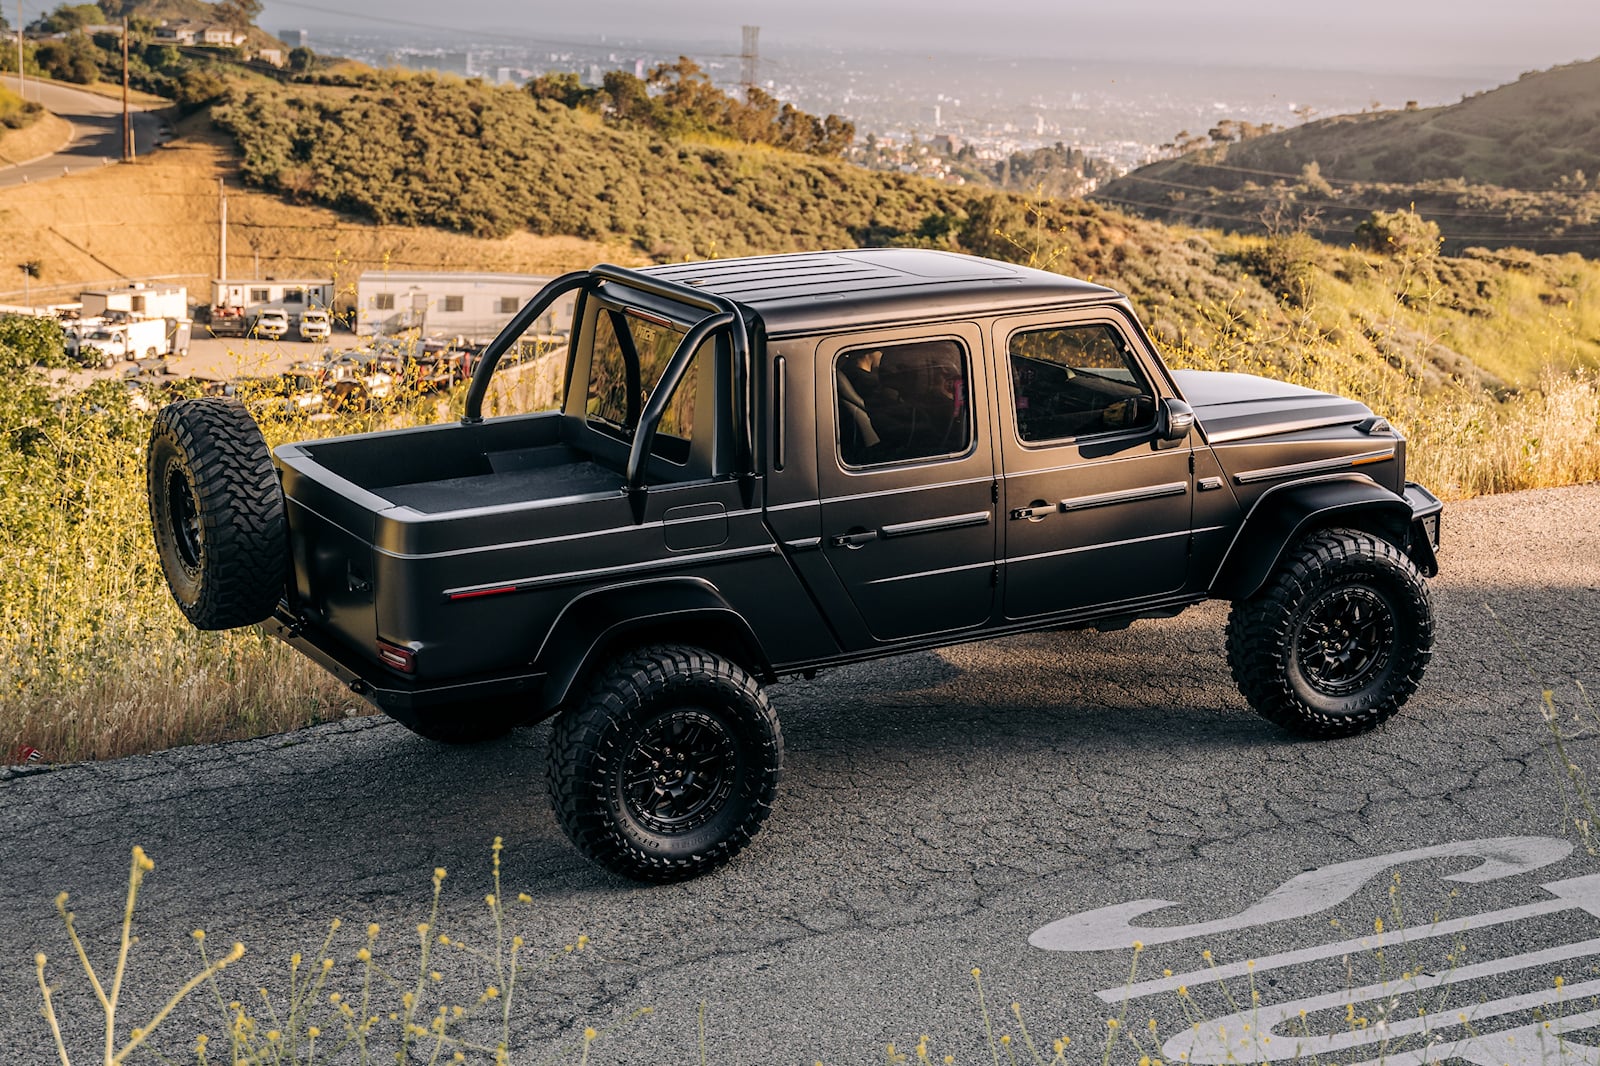 This is a $385,000 custom Mercedes-AMG G63 pickup